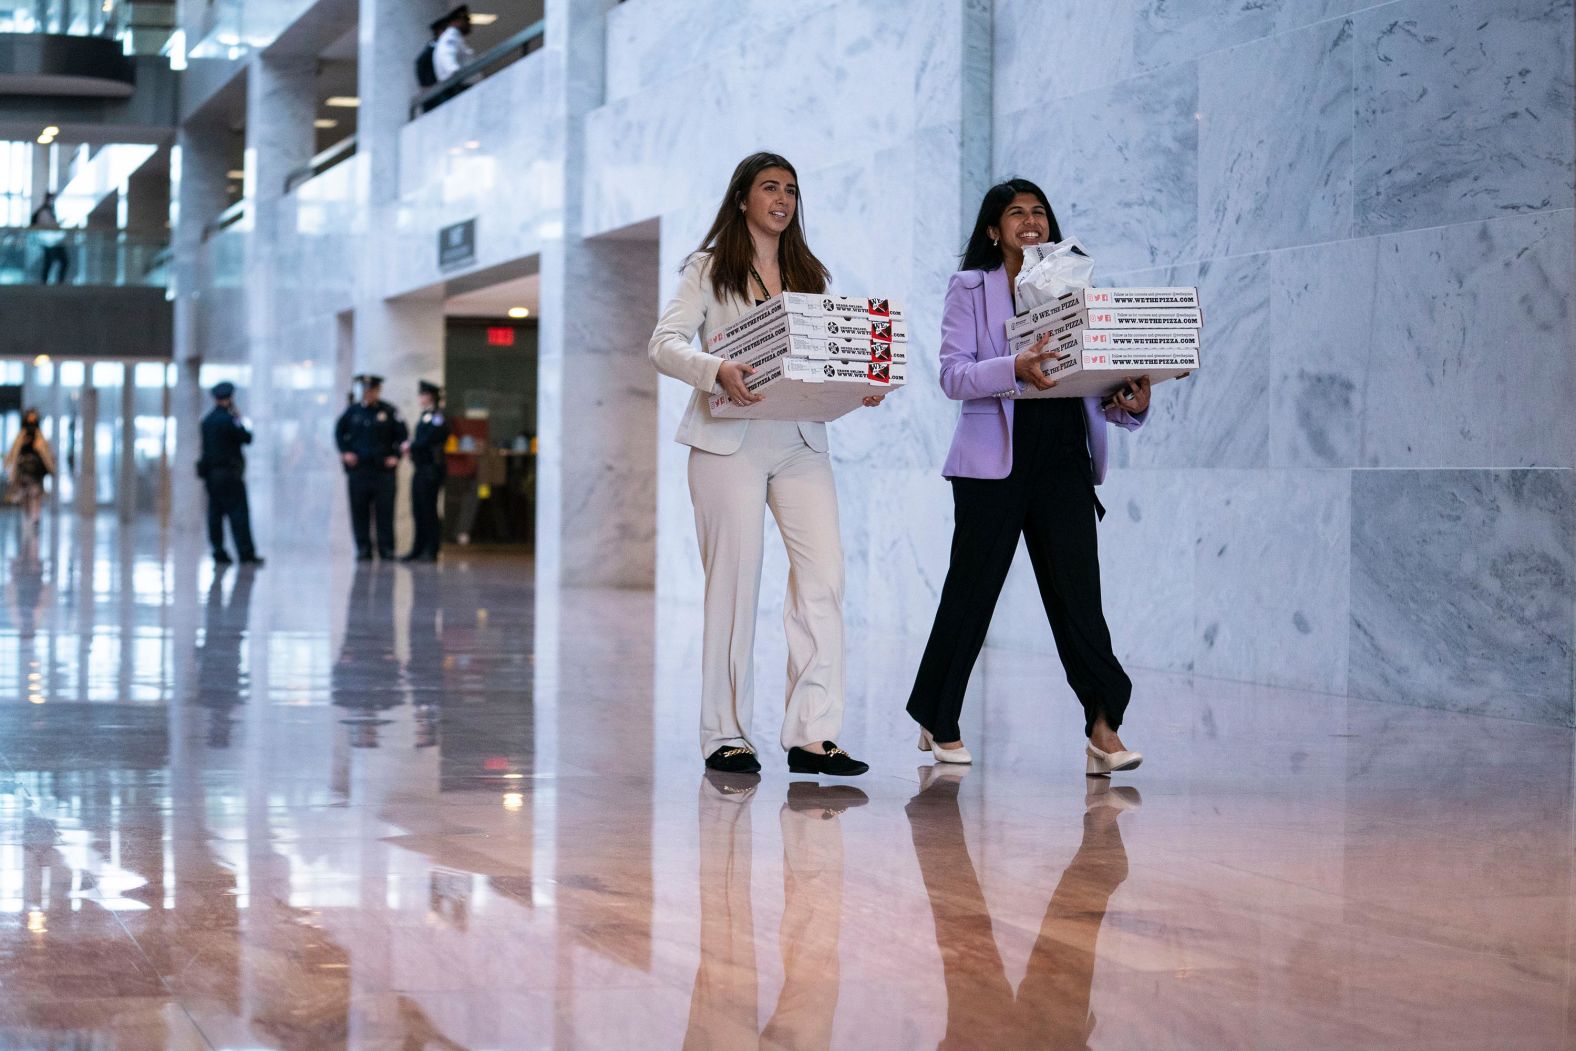 People carry pizza boxes on March 22 as the hearing stretched into the evening hours. "It's a fun cliche on Capitol Hill to take photos of the staffers carrying pizza boxes (almost always from We, The Pizza), but I still love it," Silbiger said. "It's the telltale sign that congresspeople and their staff will be on campus late for something historic."